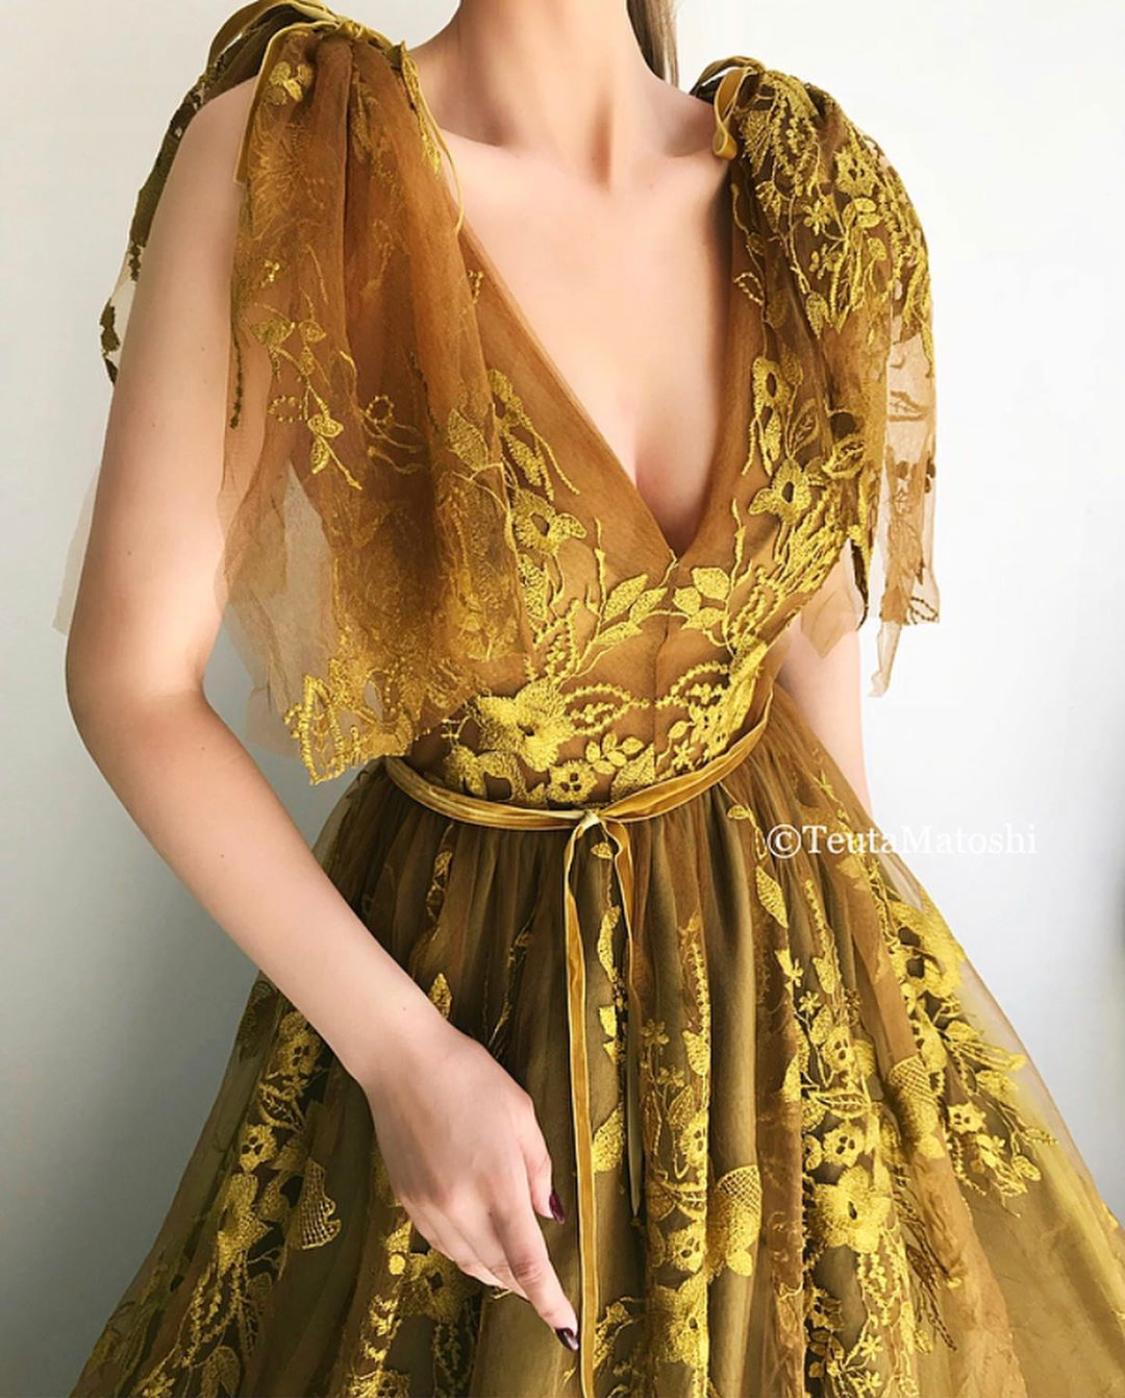 Gold A-Line dress with v-neck, no sleeves, lace and embroidery